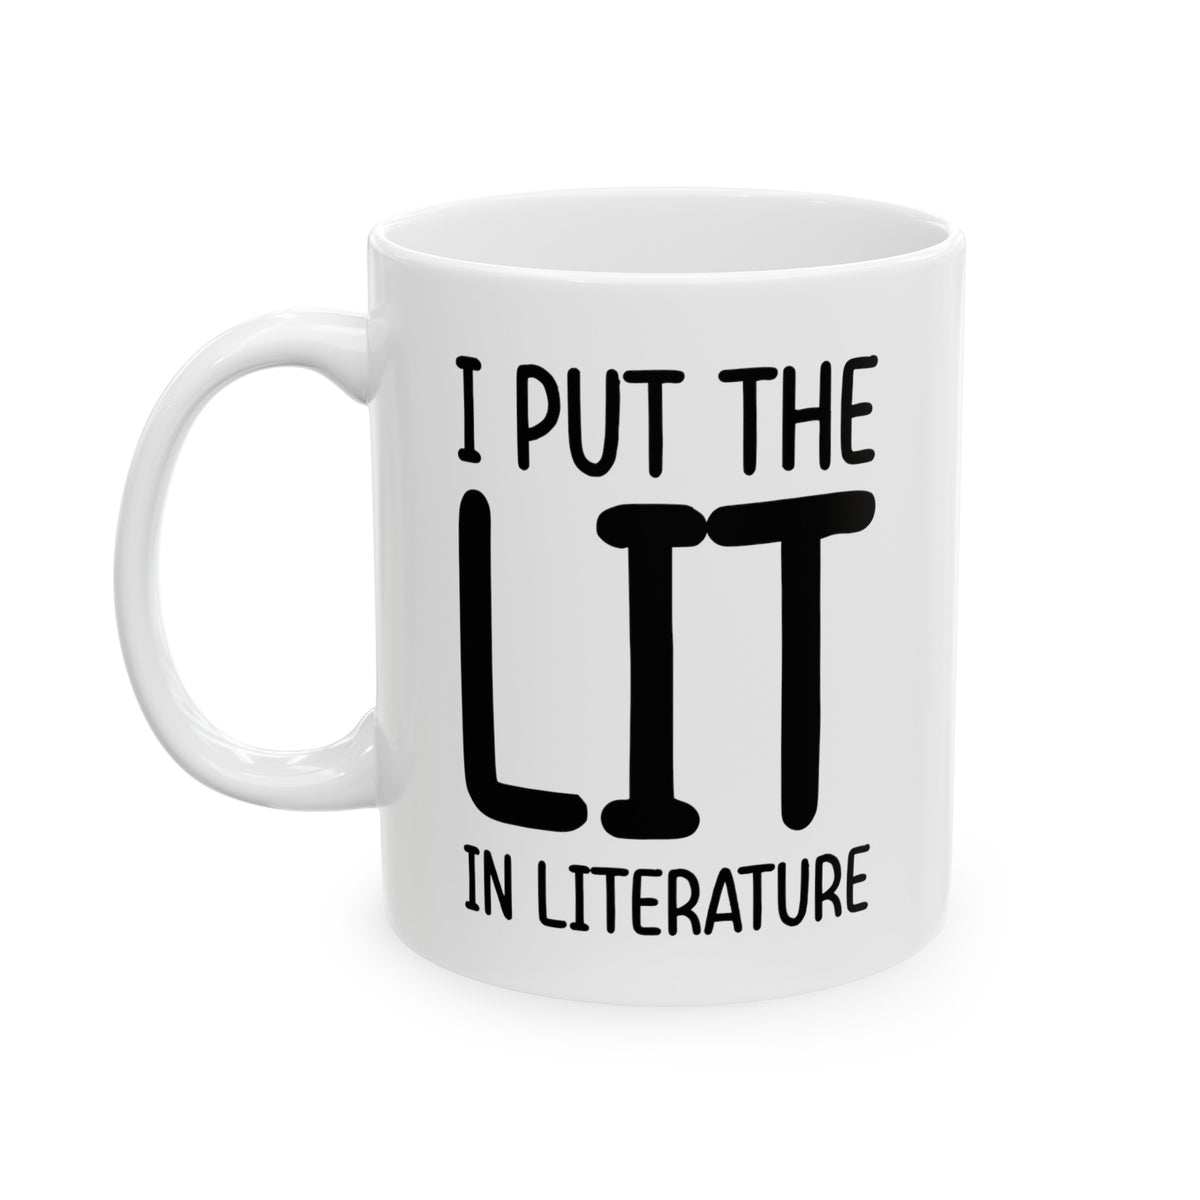 Fun Grammar Teacher Coffee Mug - I put the lit in literature Cup - Funny Gifts for Literature Majors & English